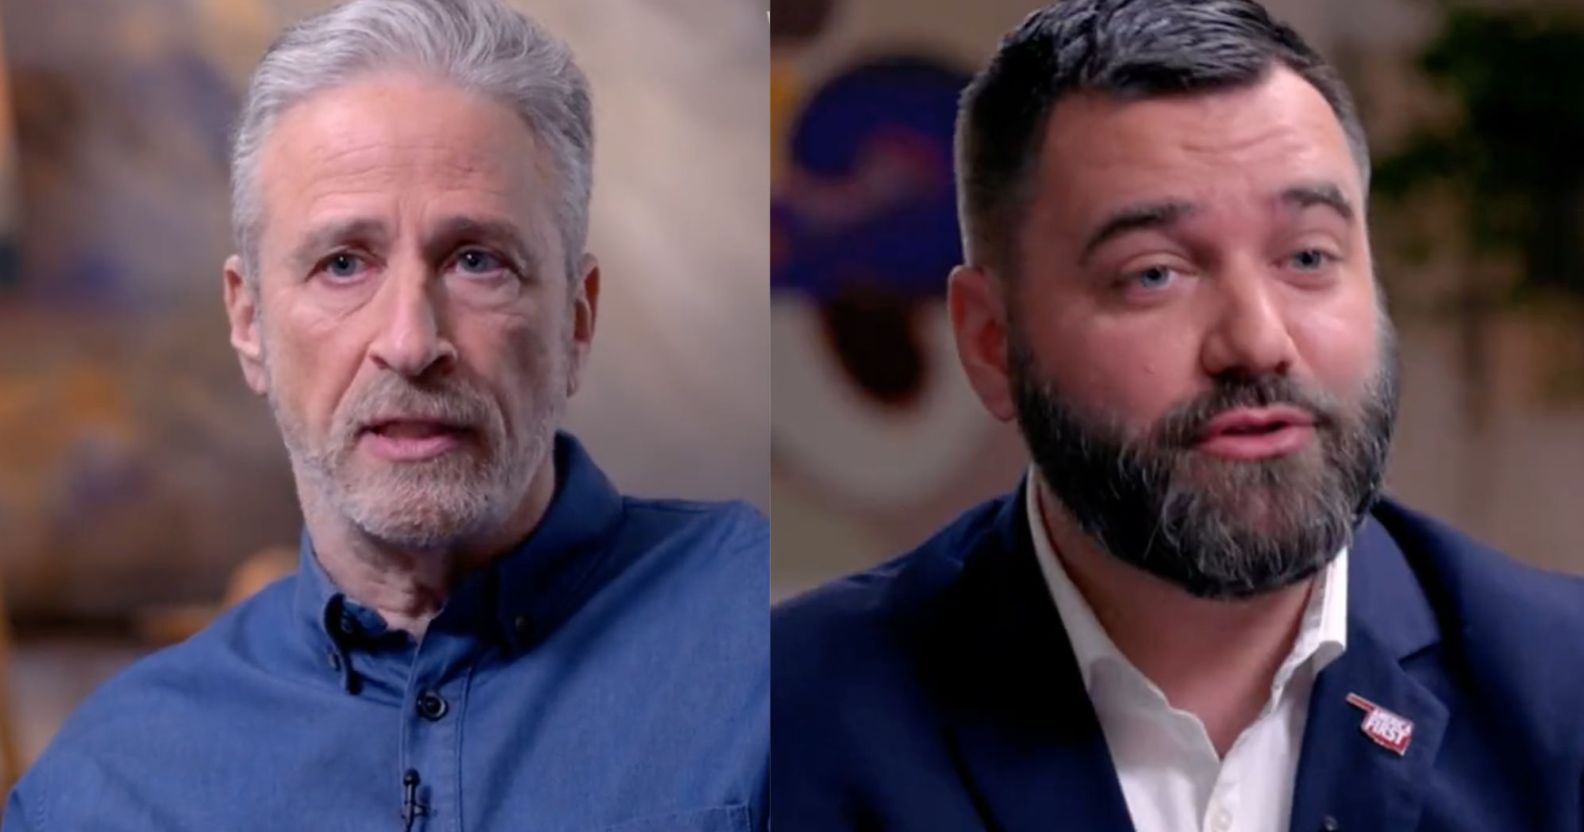 Side by side images of Jon Stewart and Oklahoma senator Nathan Dahm from their debate on gun control and drag on the show The Problem with Jon Stewart